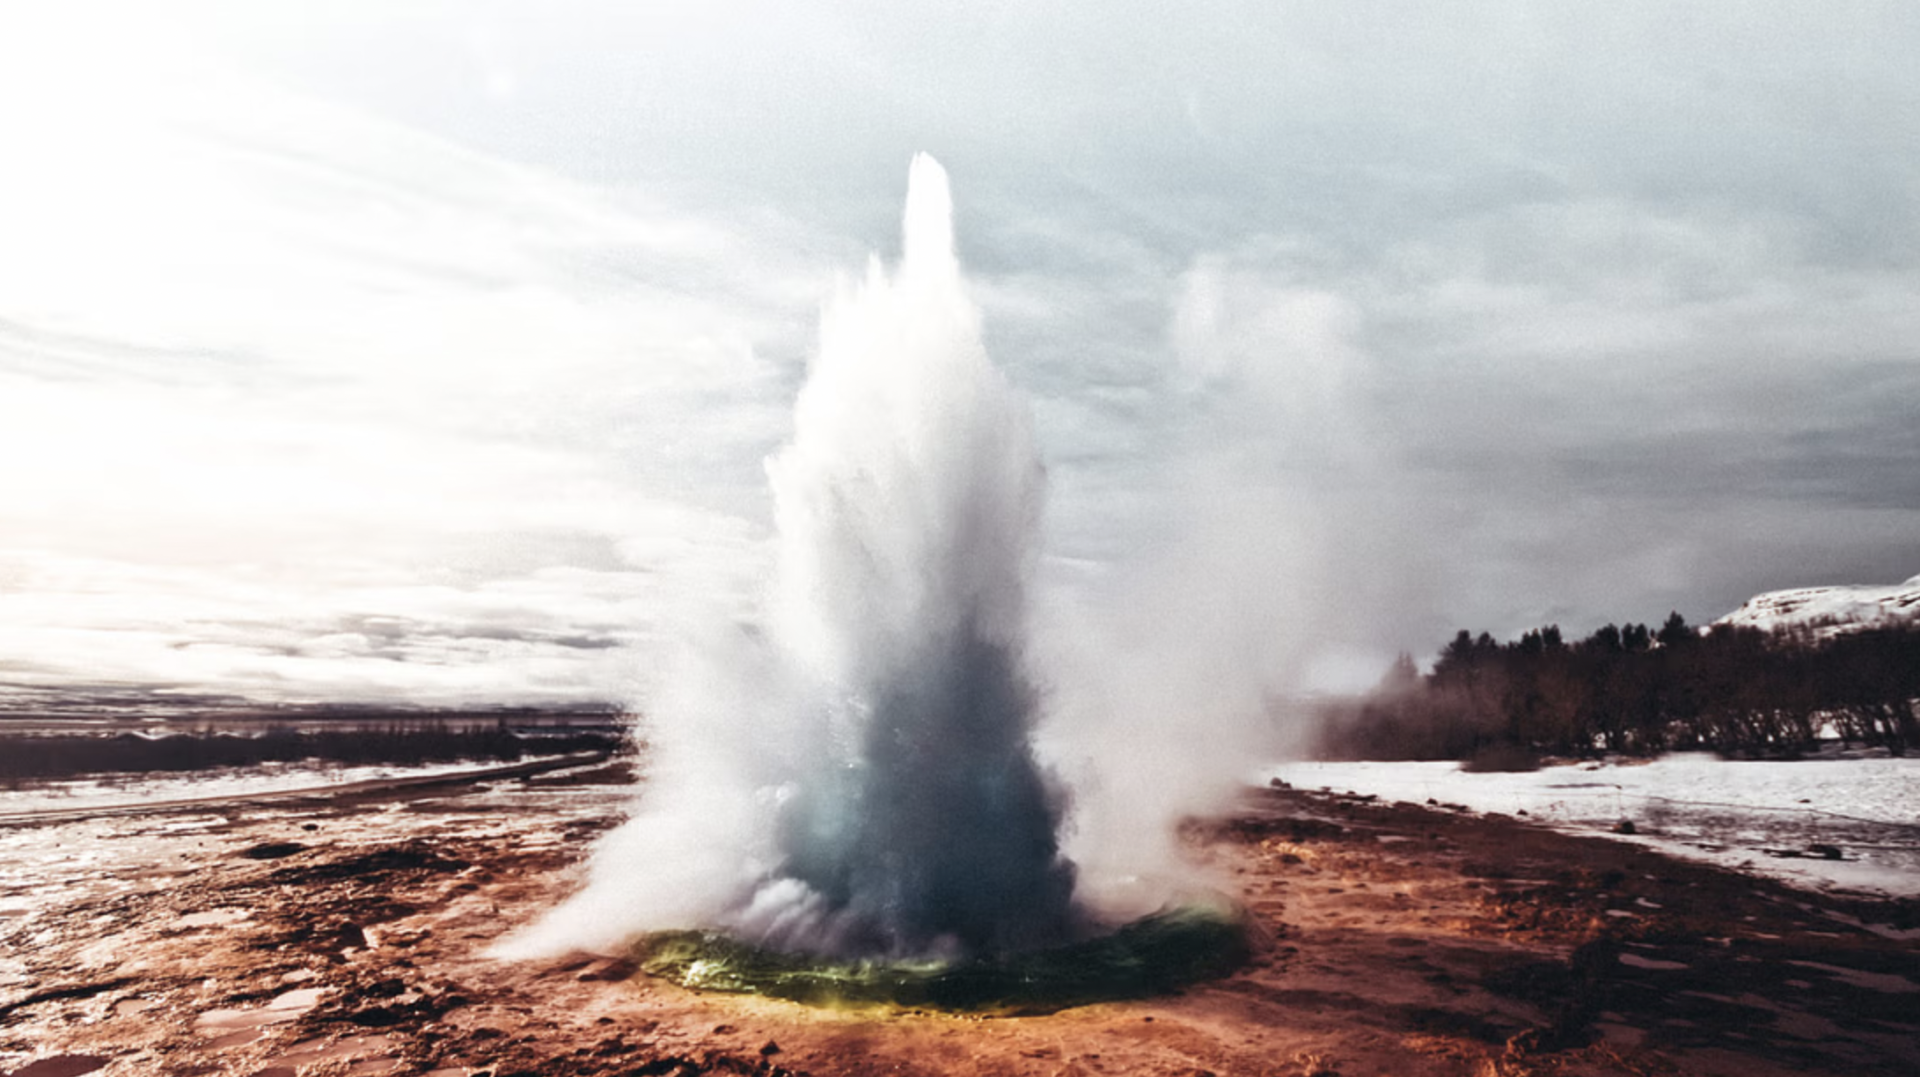 Geysir is one of the best attractions in the Golden Circle in Iceland